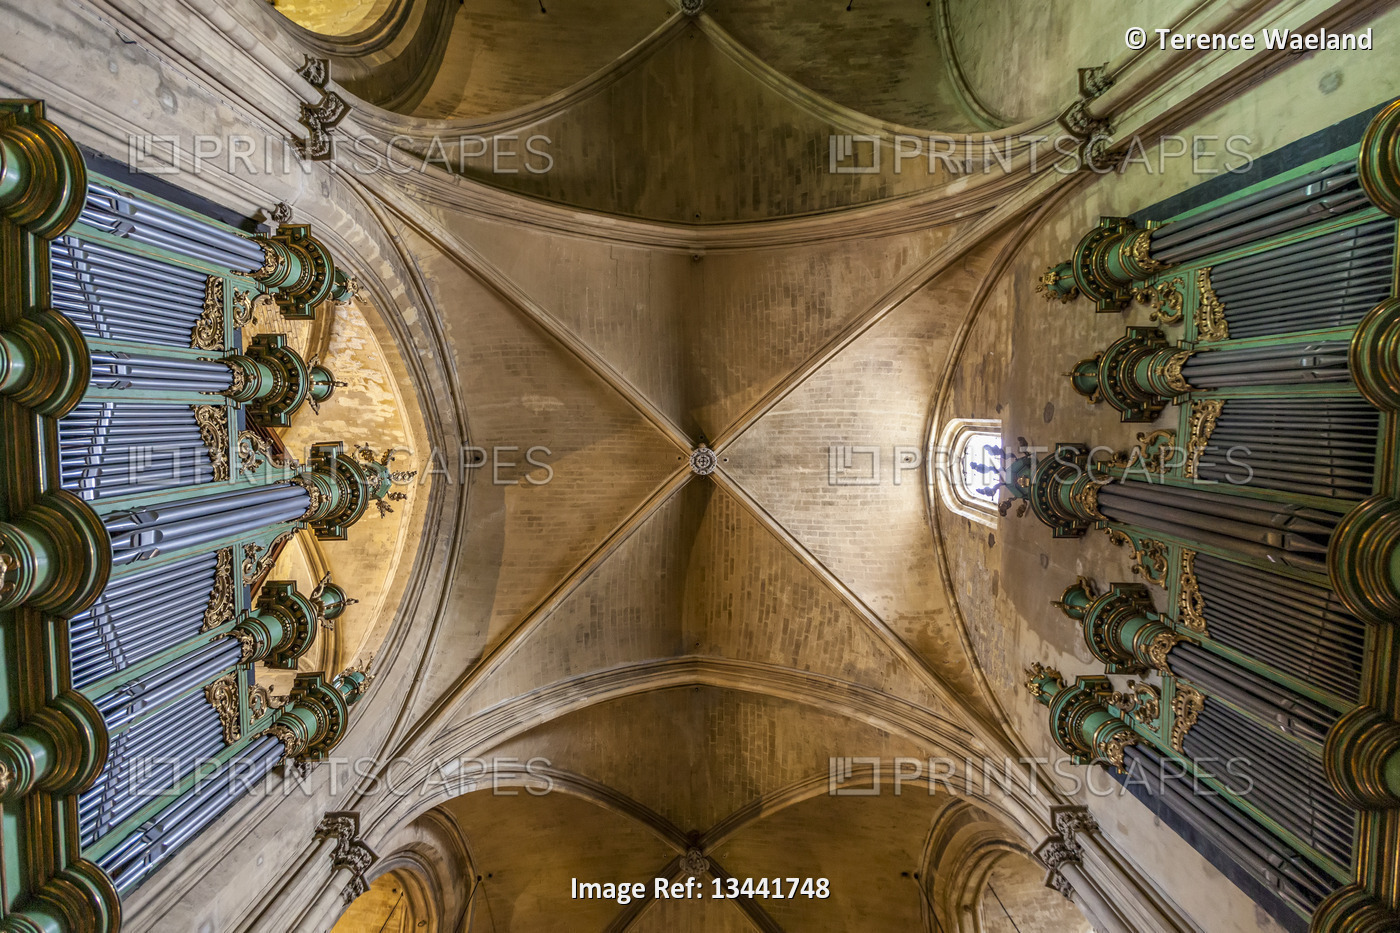 Vaulted ceiling and Ducroquet/Cavaille-Coll organ of Aix-en-Provence Cathedral ...